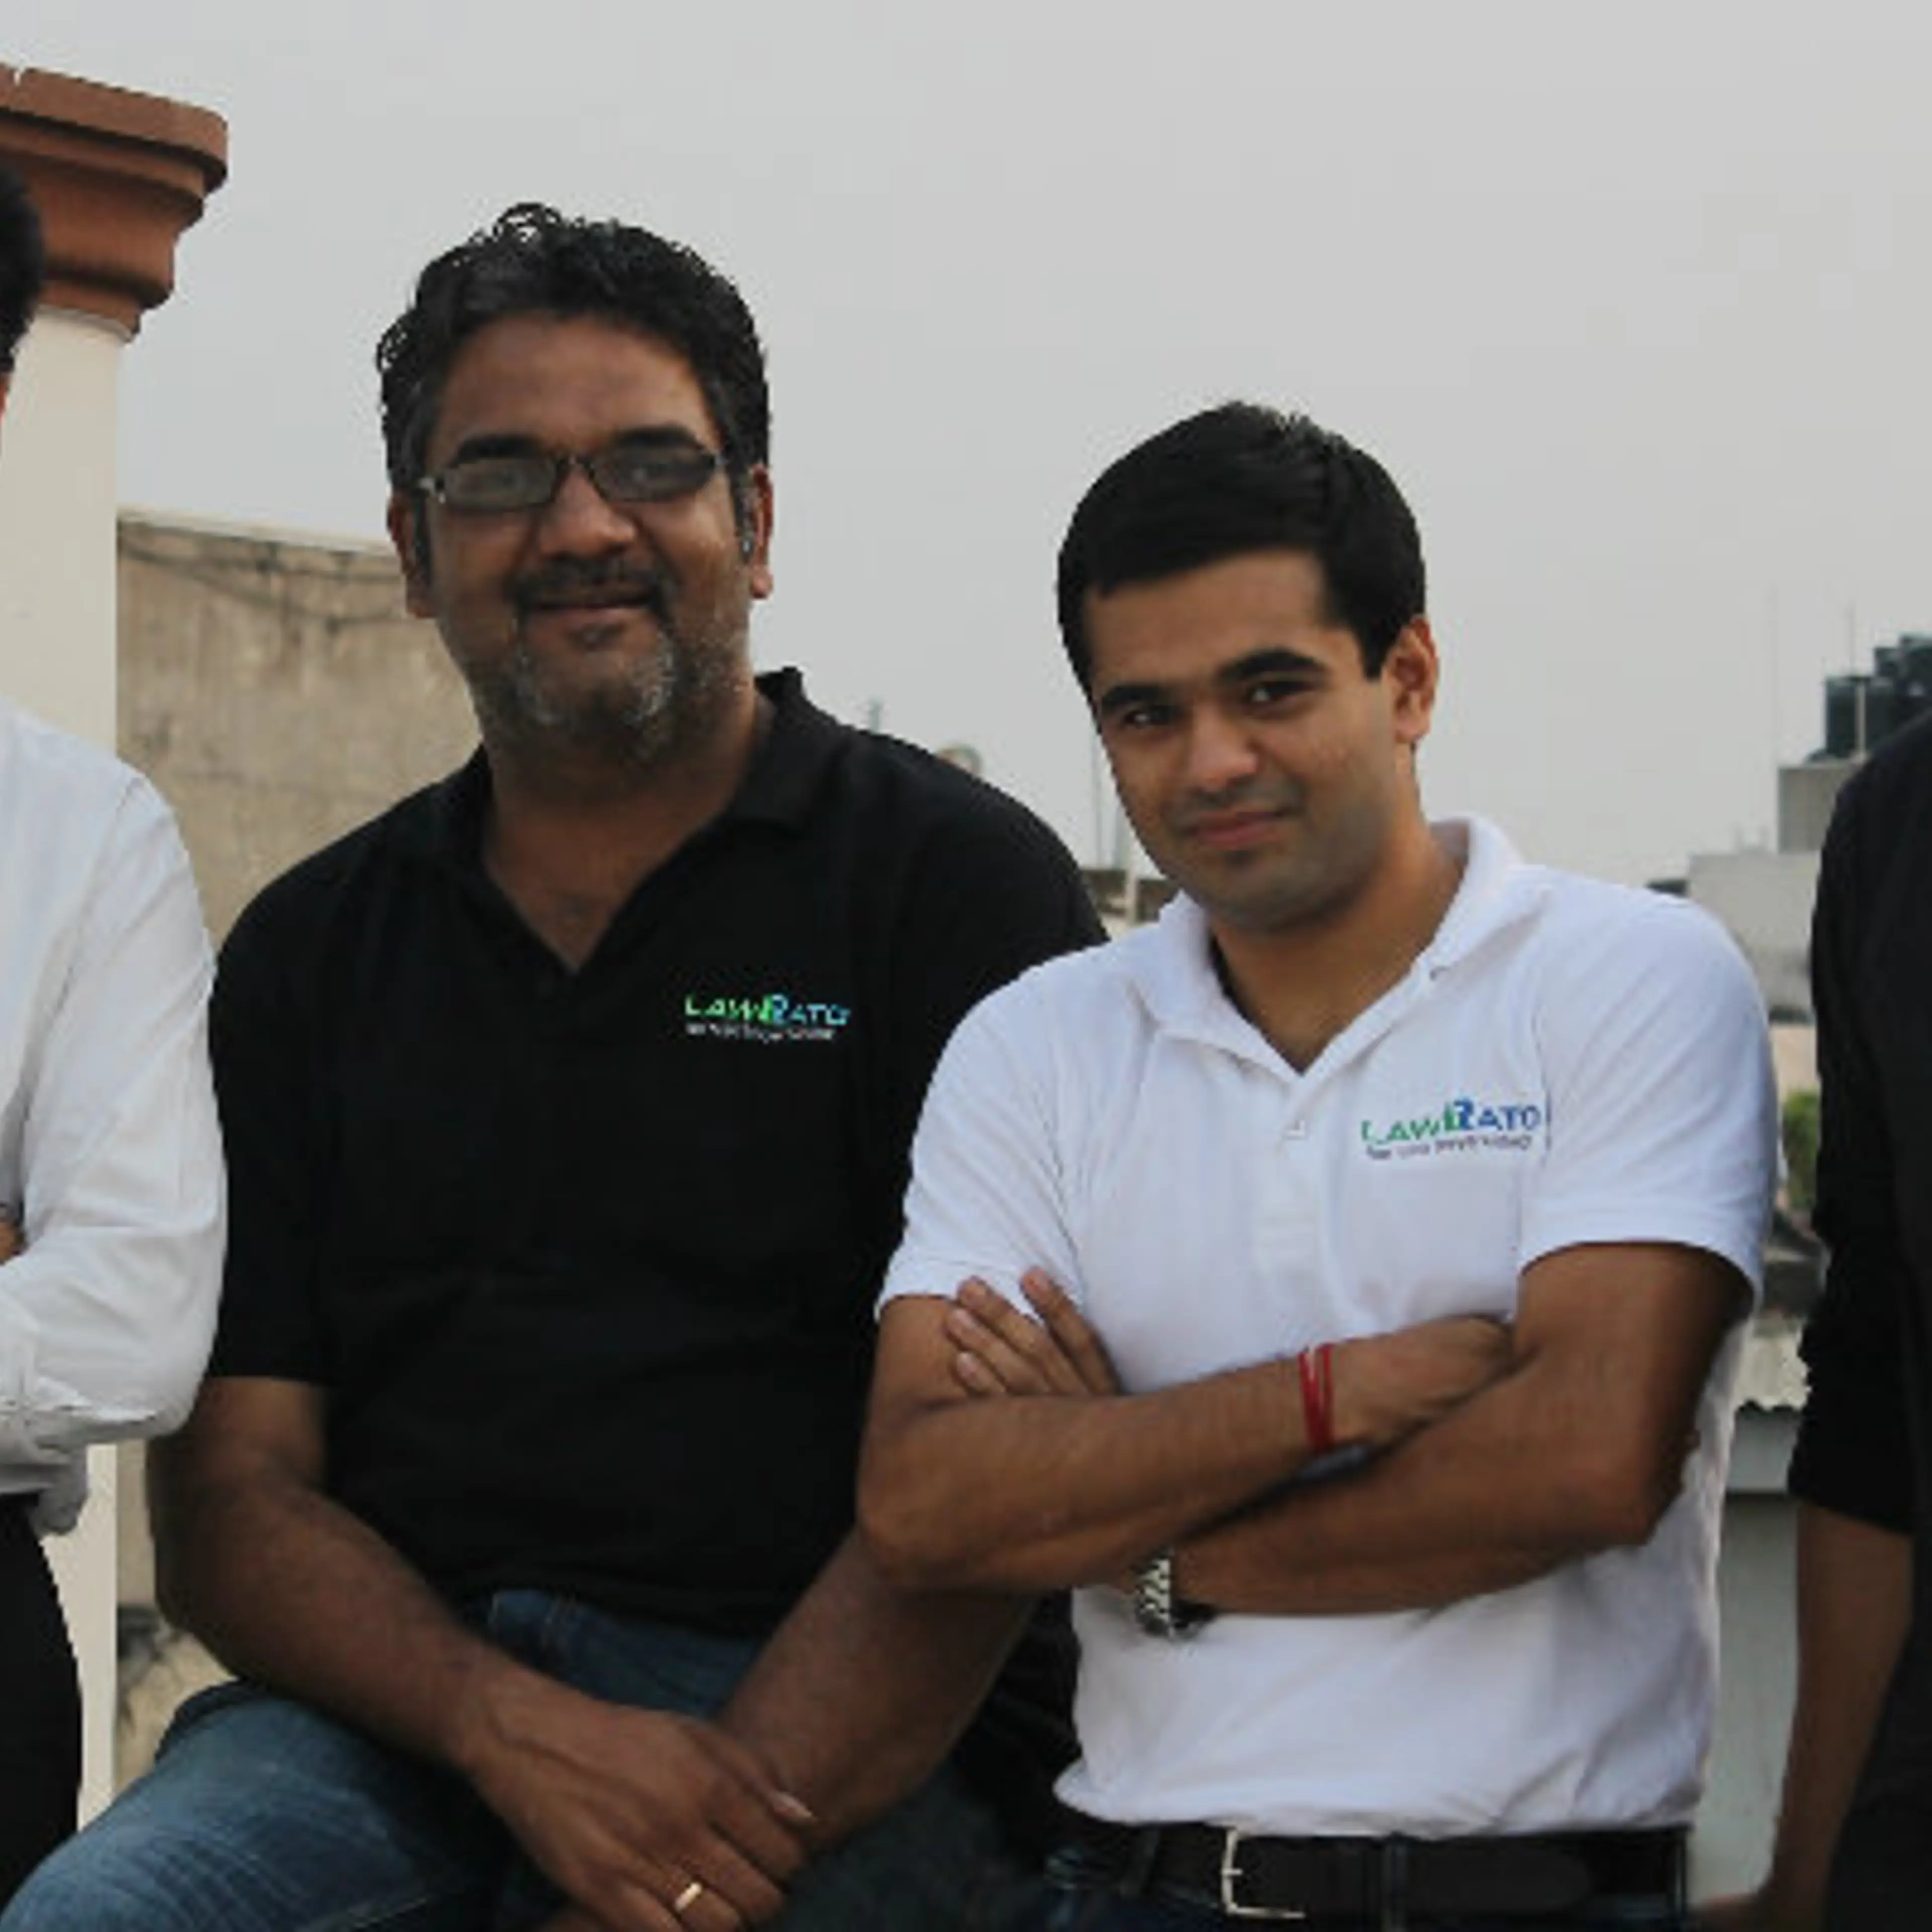 Delhi based LawRato.com offers comprehensive legal services with more than 1000 verified lawyers